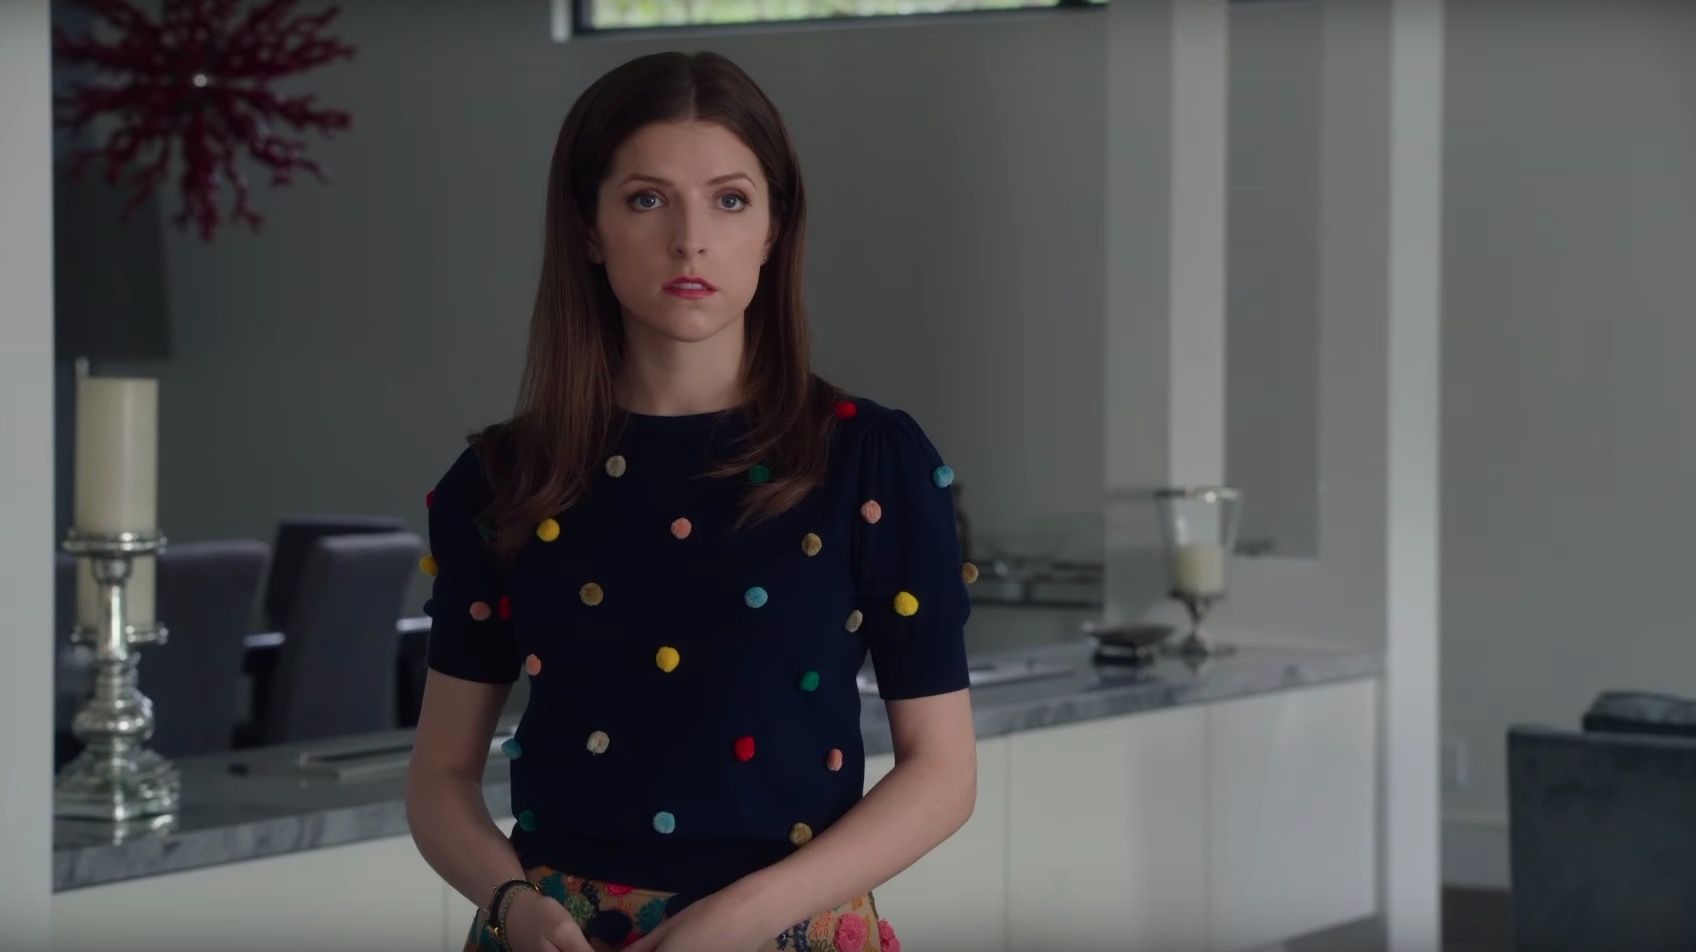 A Simple Favor: Let's Talk About That Ending, Shall We?